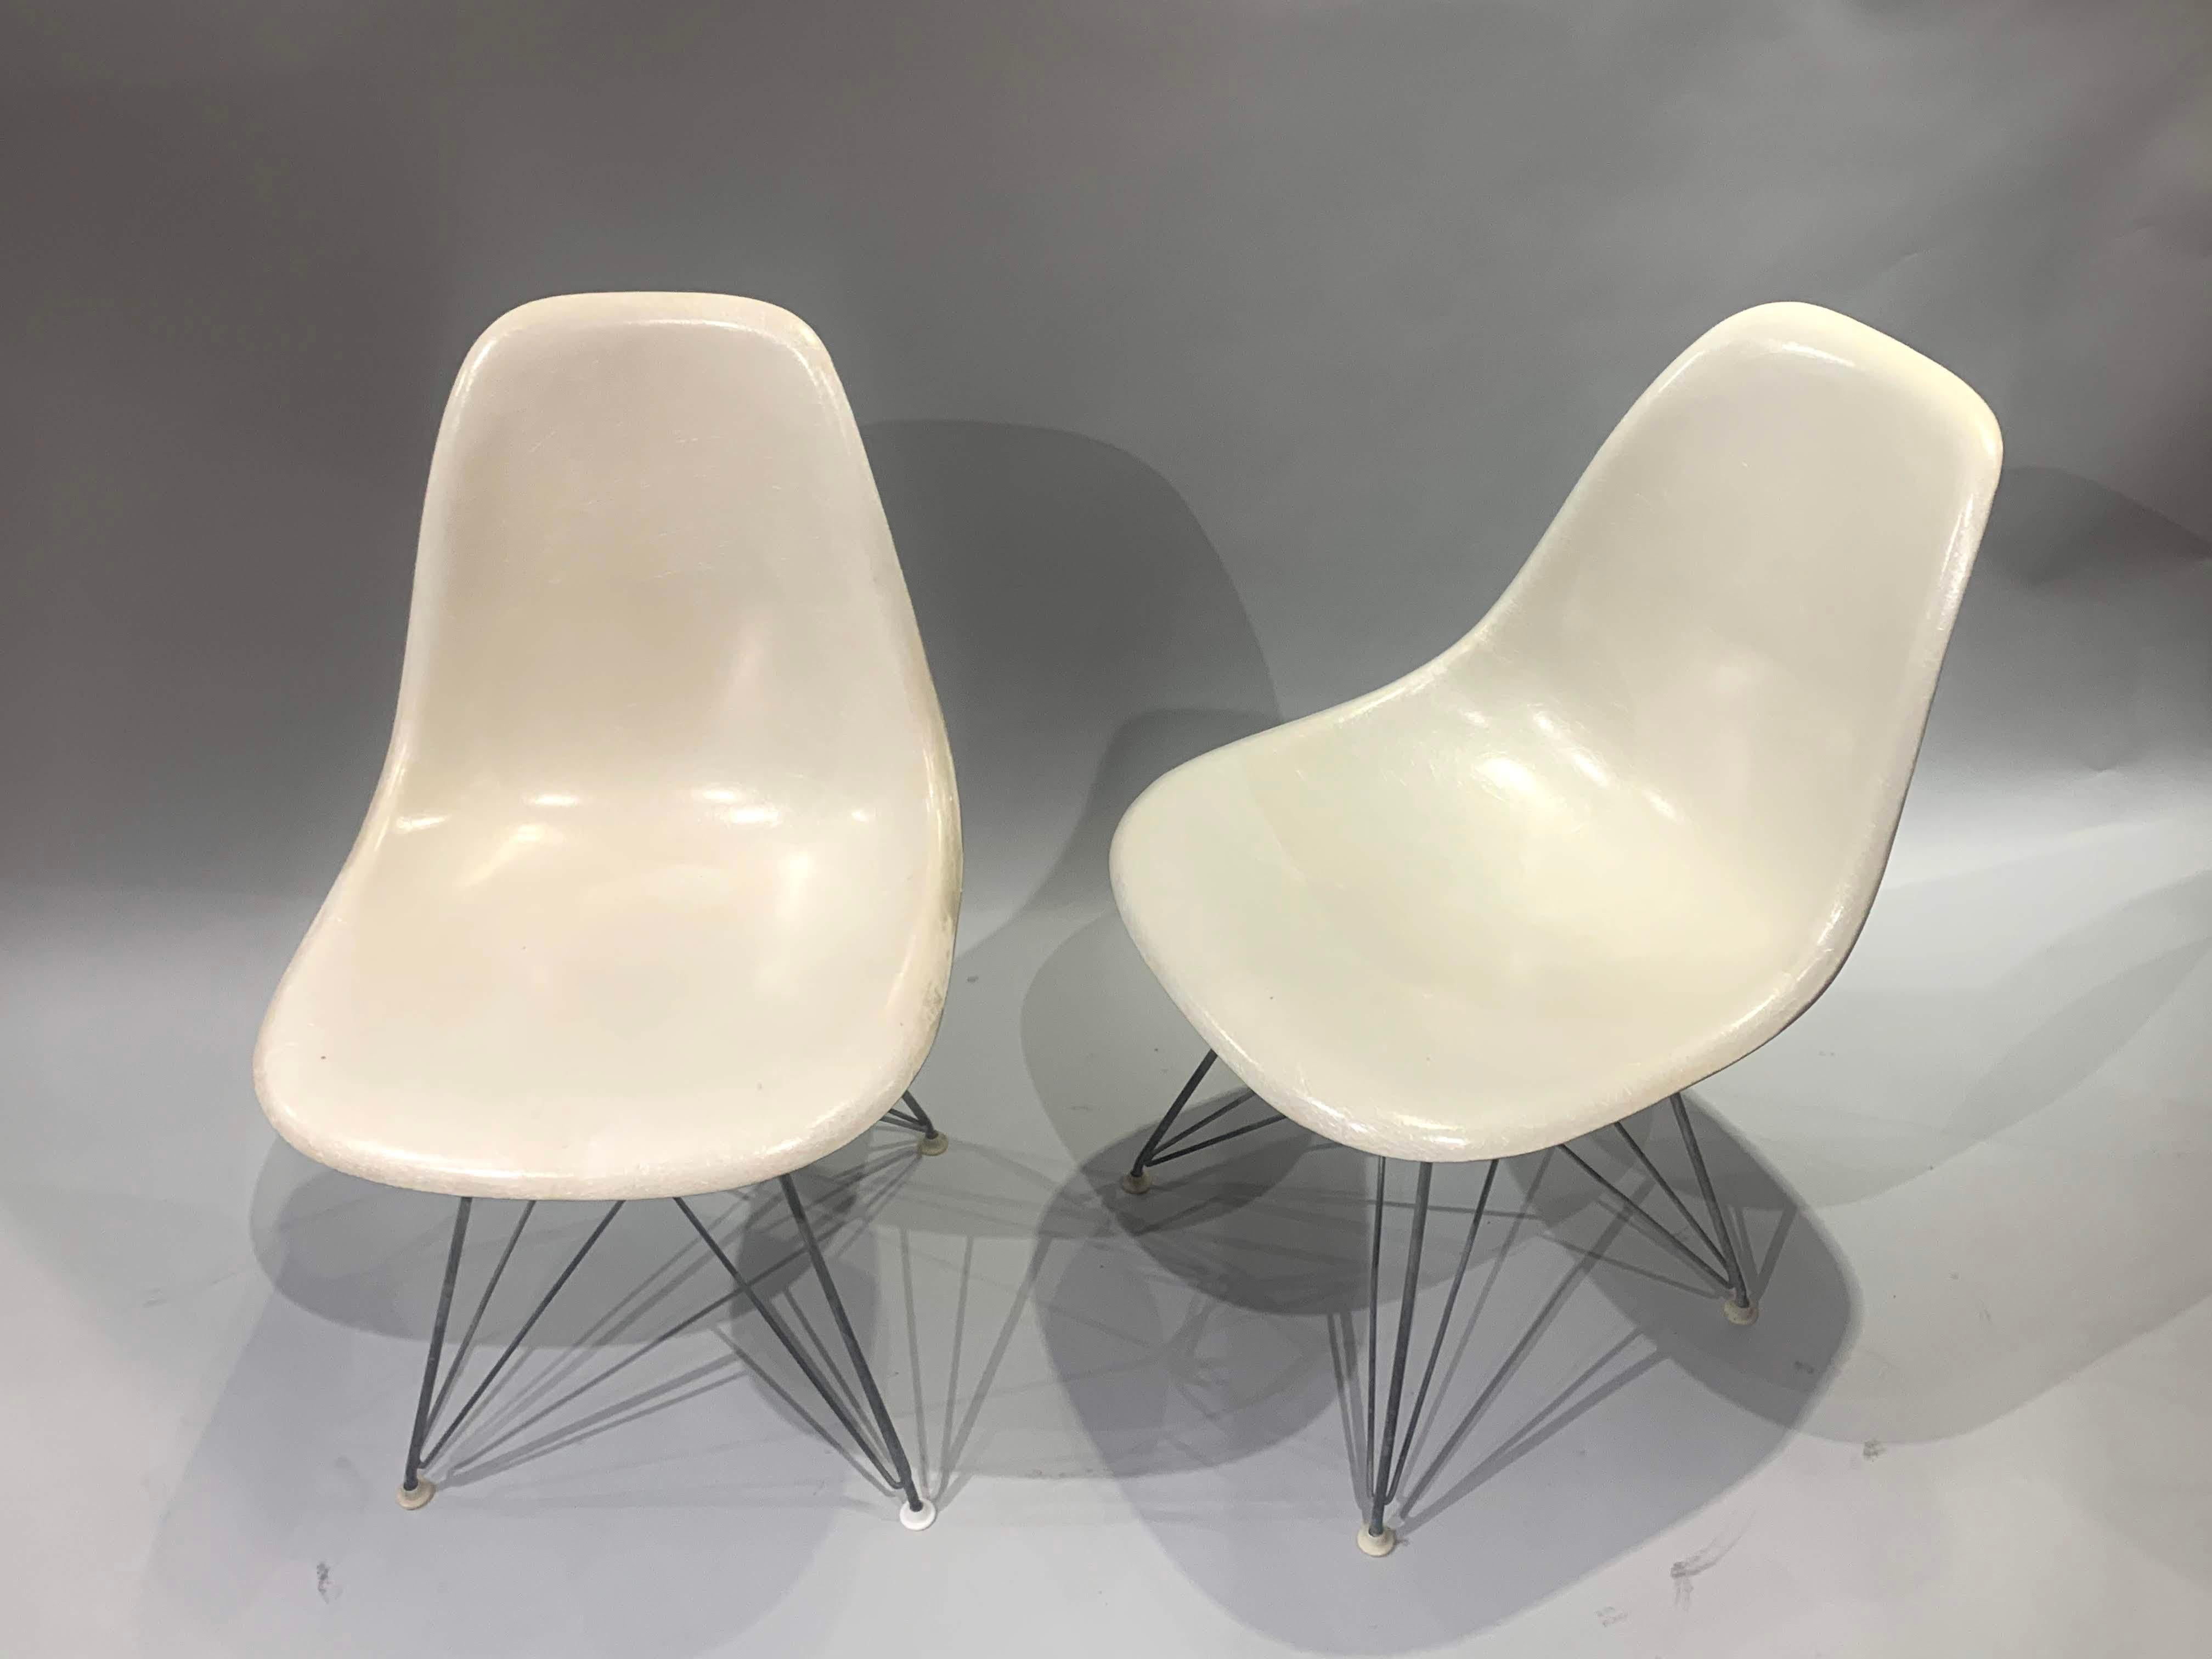 Mid-Century Modern Pair of Midcentury Eames Fiberglass Eiffel Tower Shell Chairs for Herman Miller